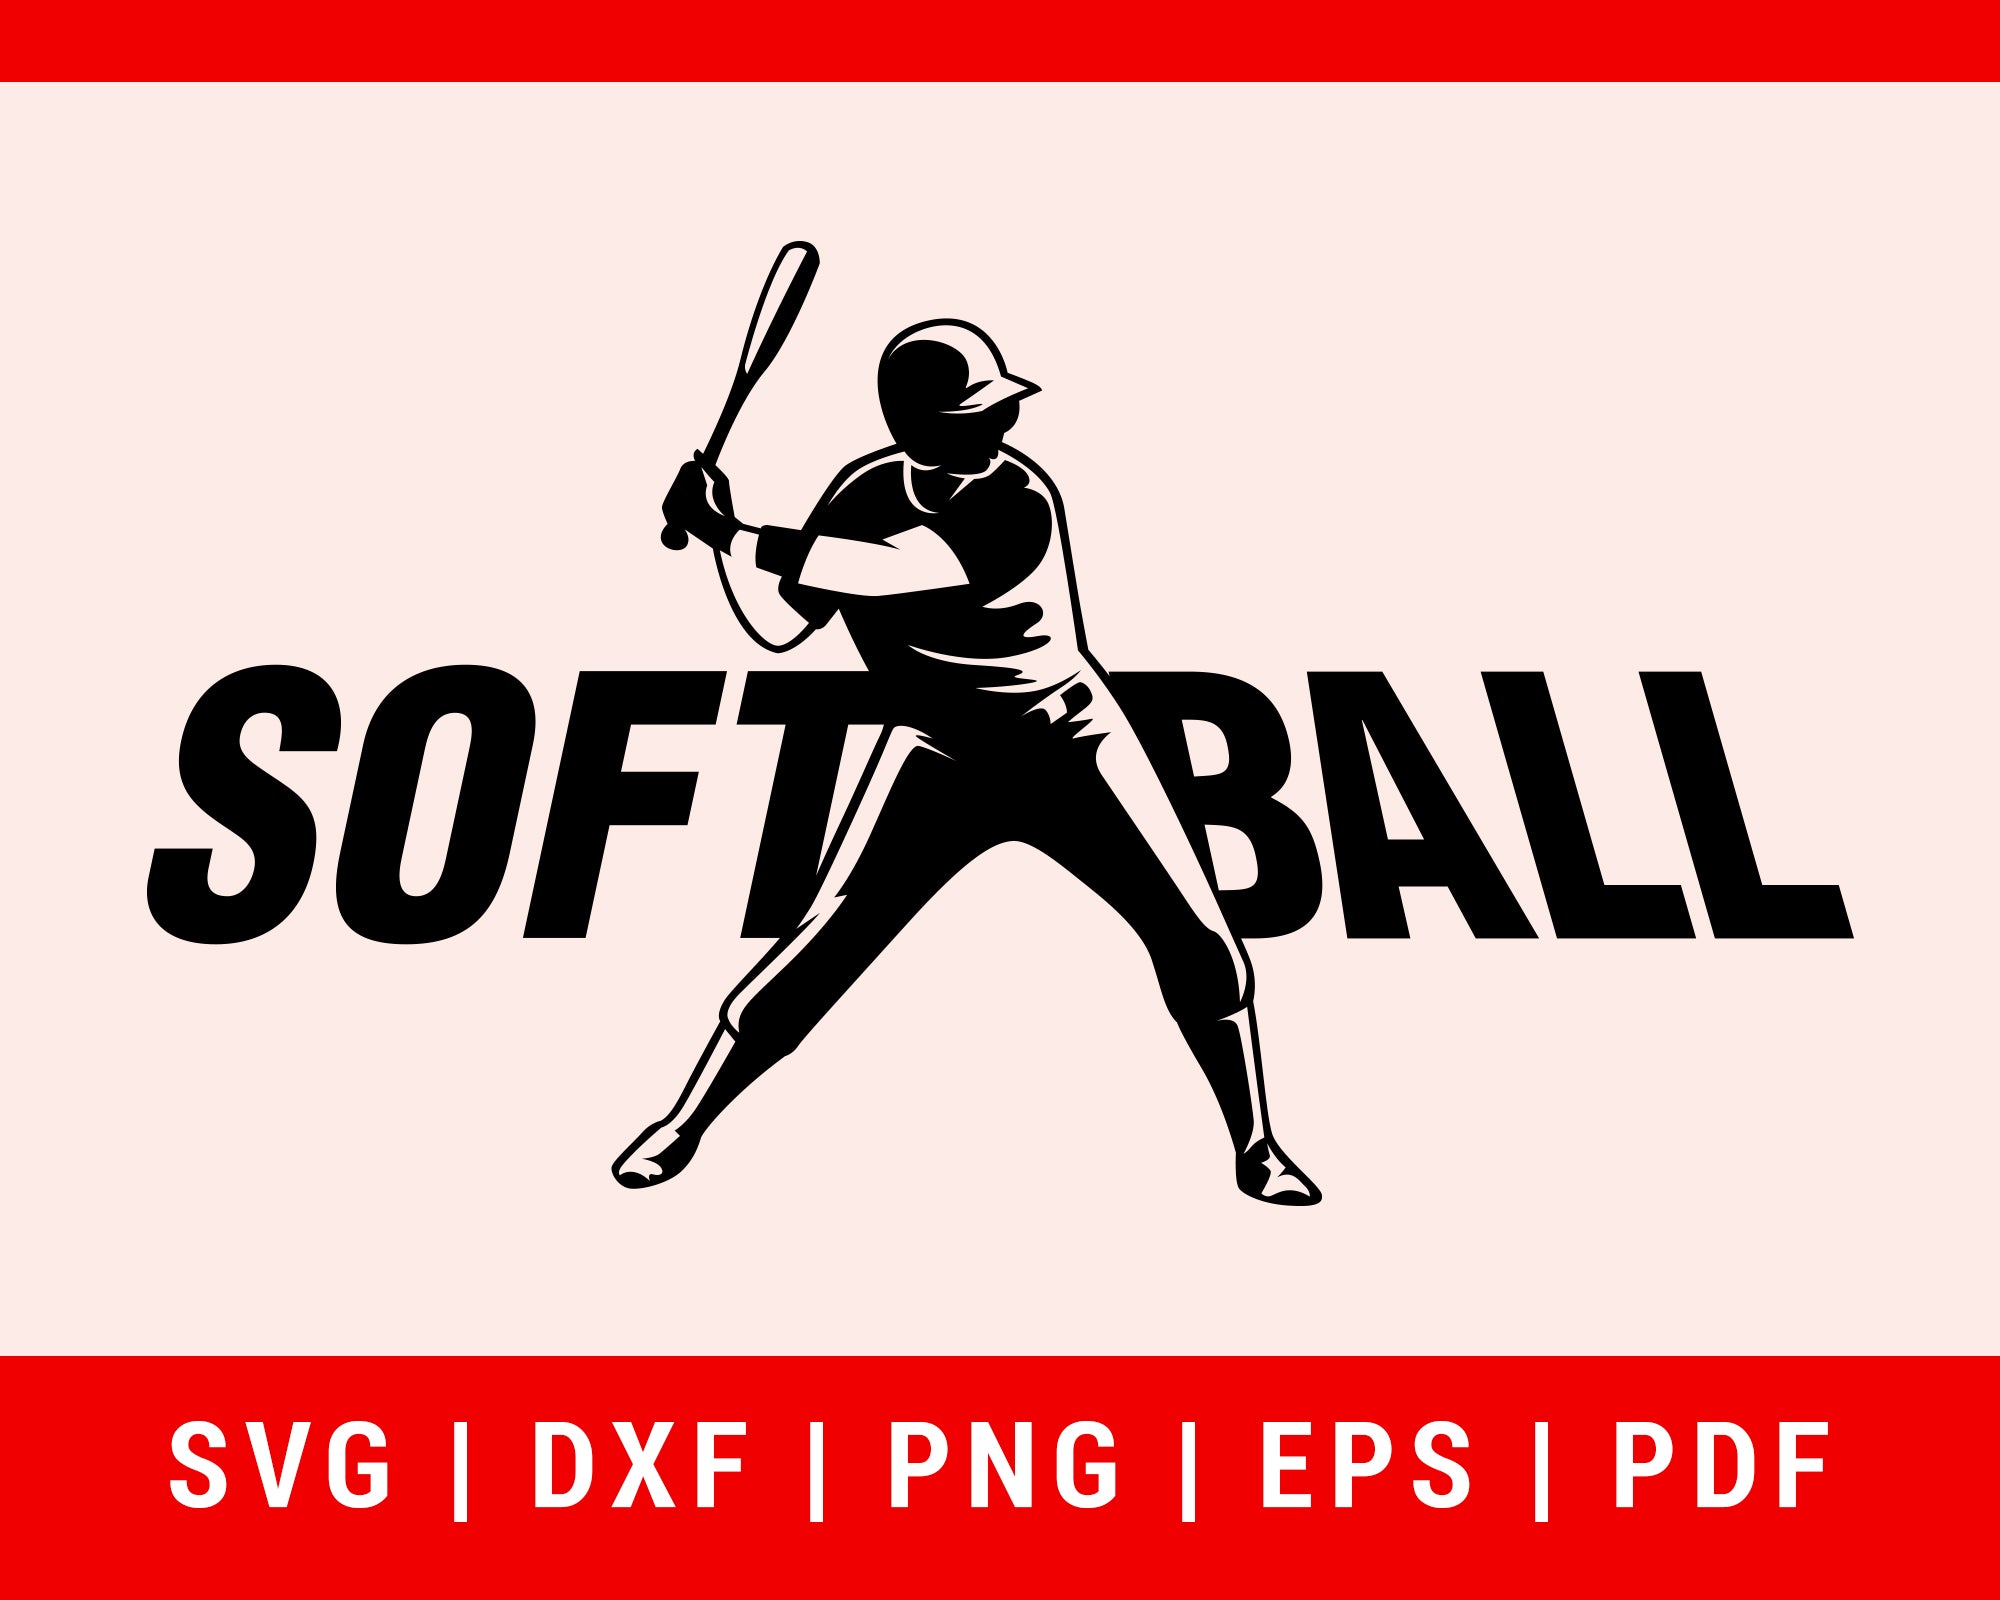 Softball Players Silhouettes Cut File For Cricut Bundle svg, dxf, png, eps, pdf Printable Files